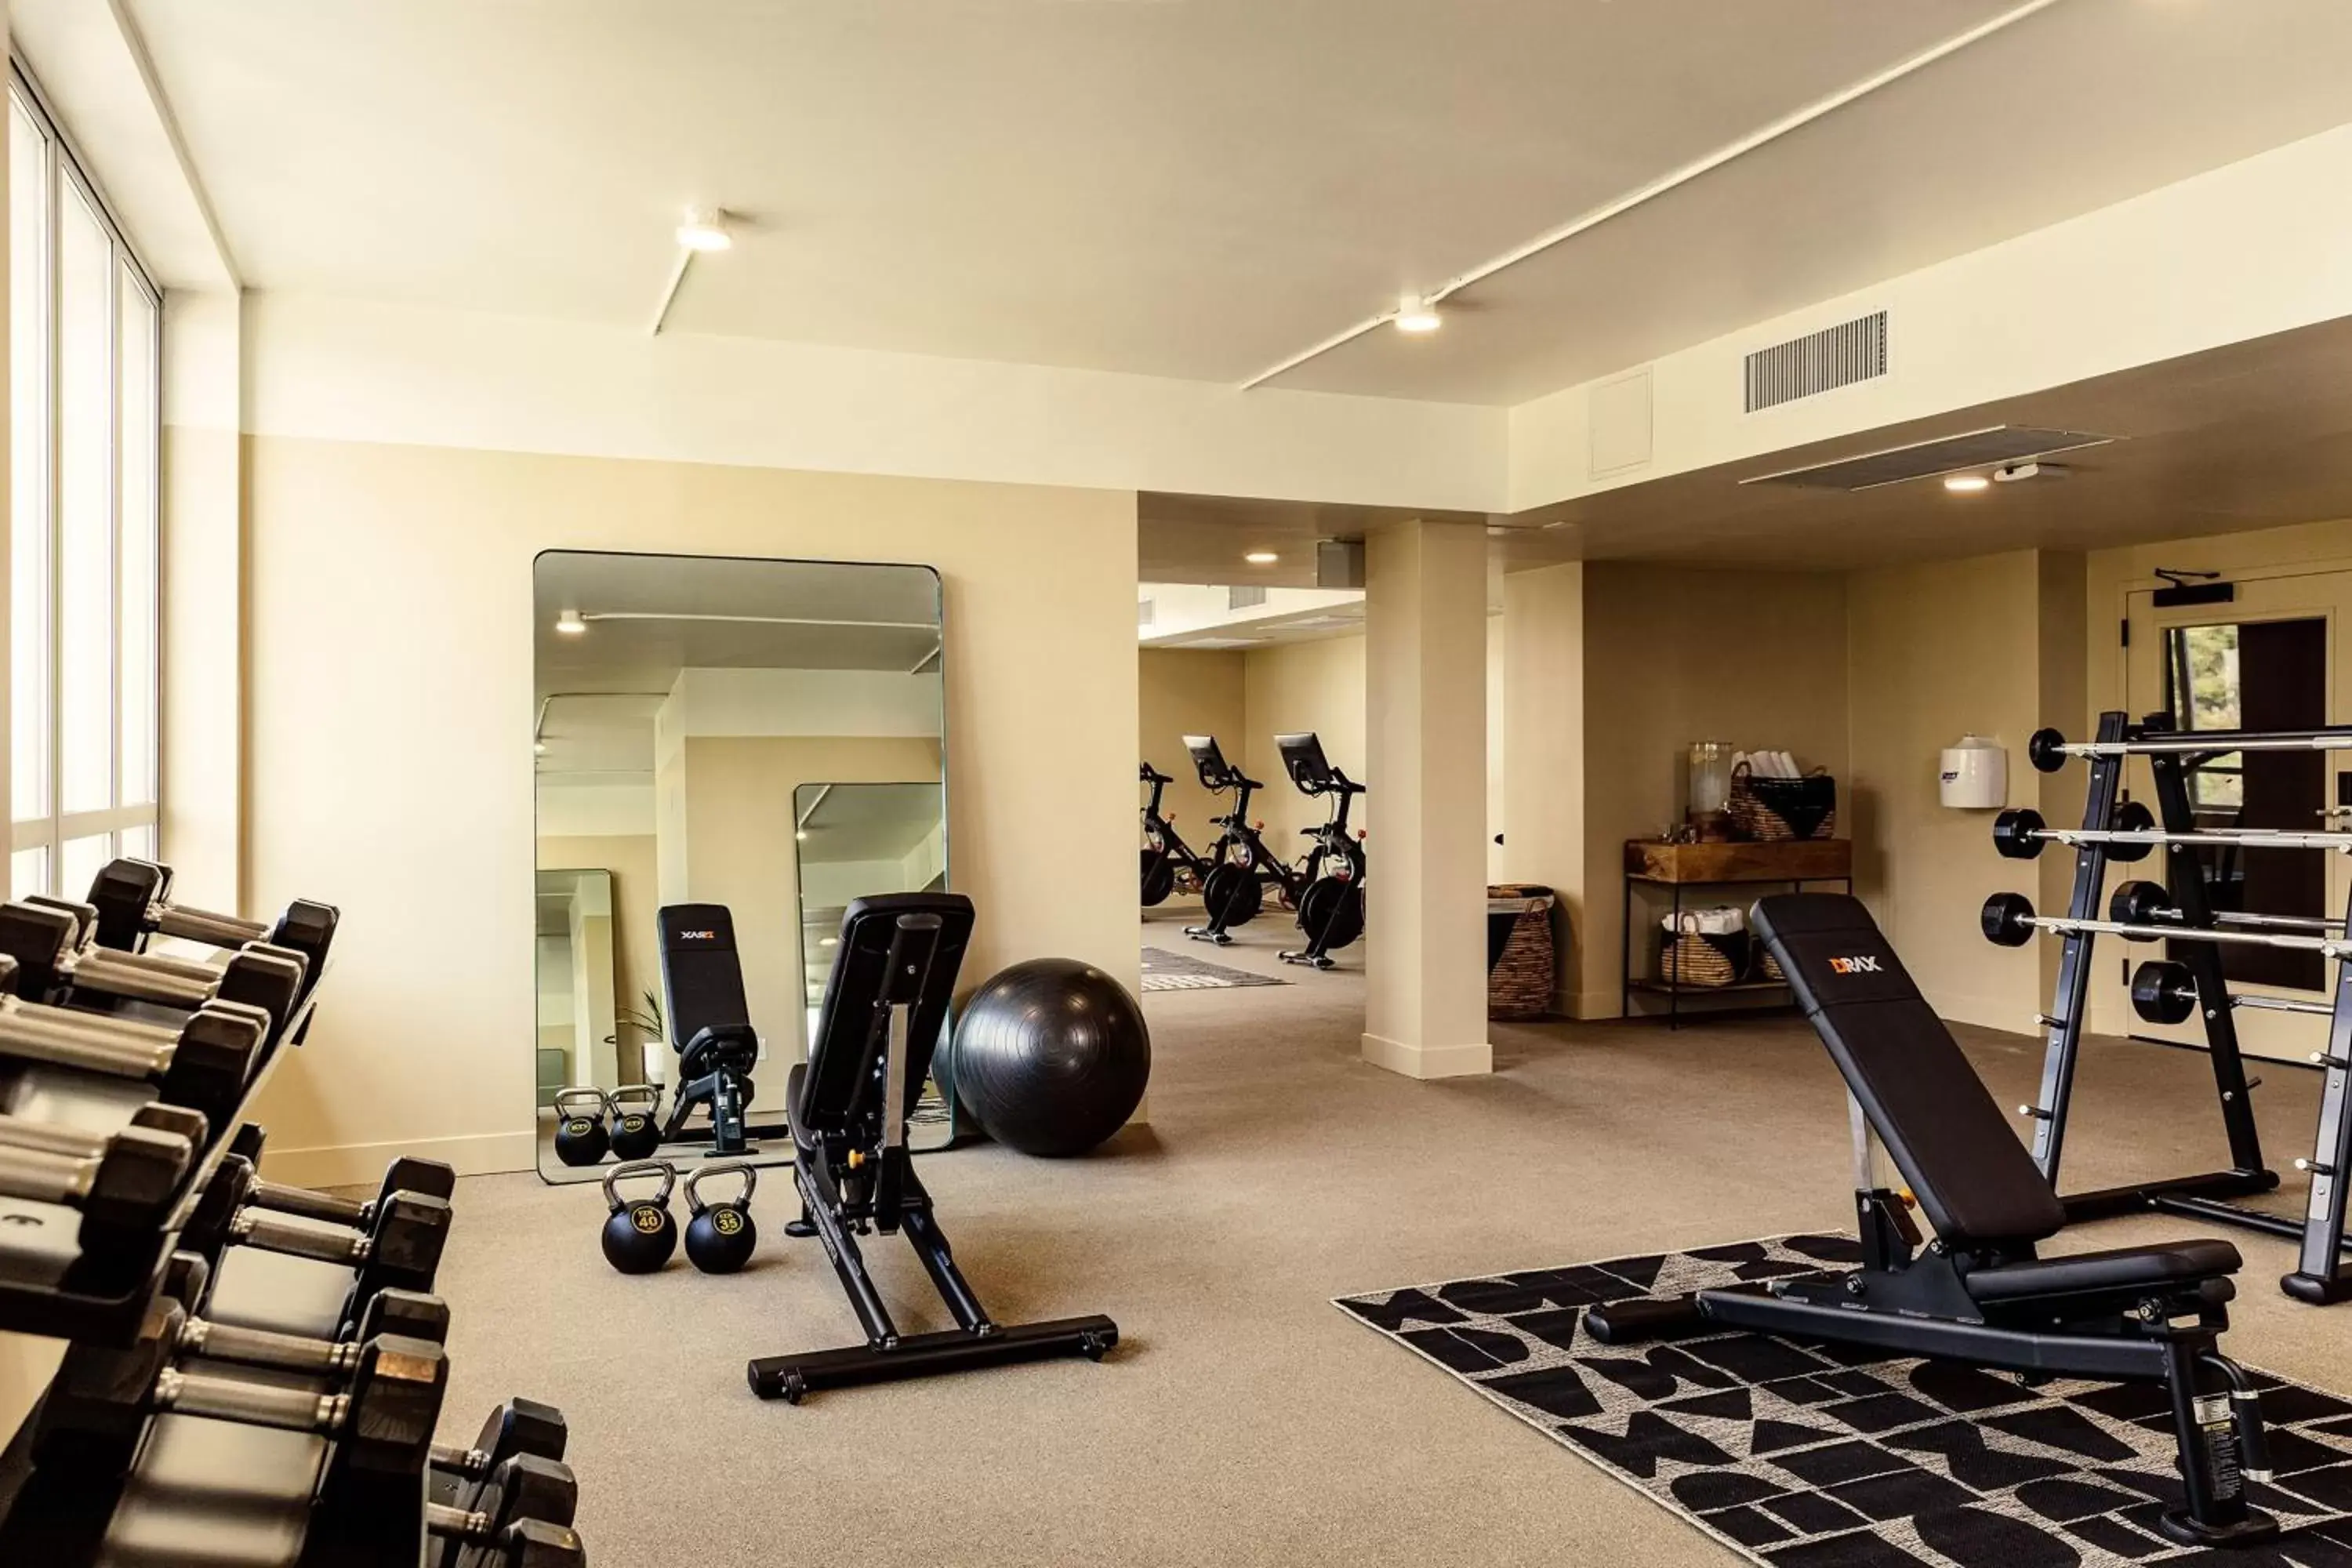 Fitness centre/facilities, Fitness Center/Facilities in Hotel June, Los Angeles, a Member of Design Hotels